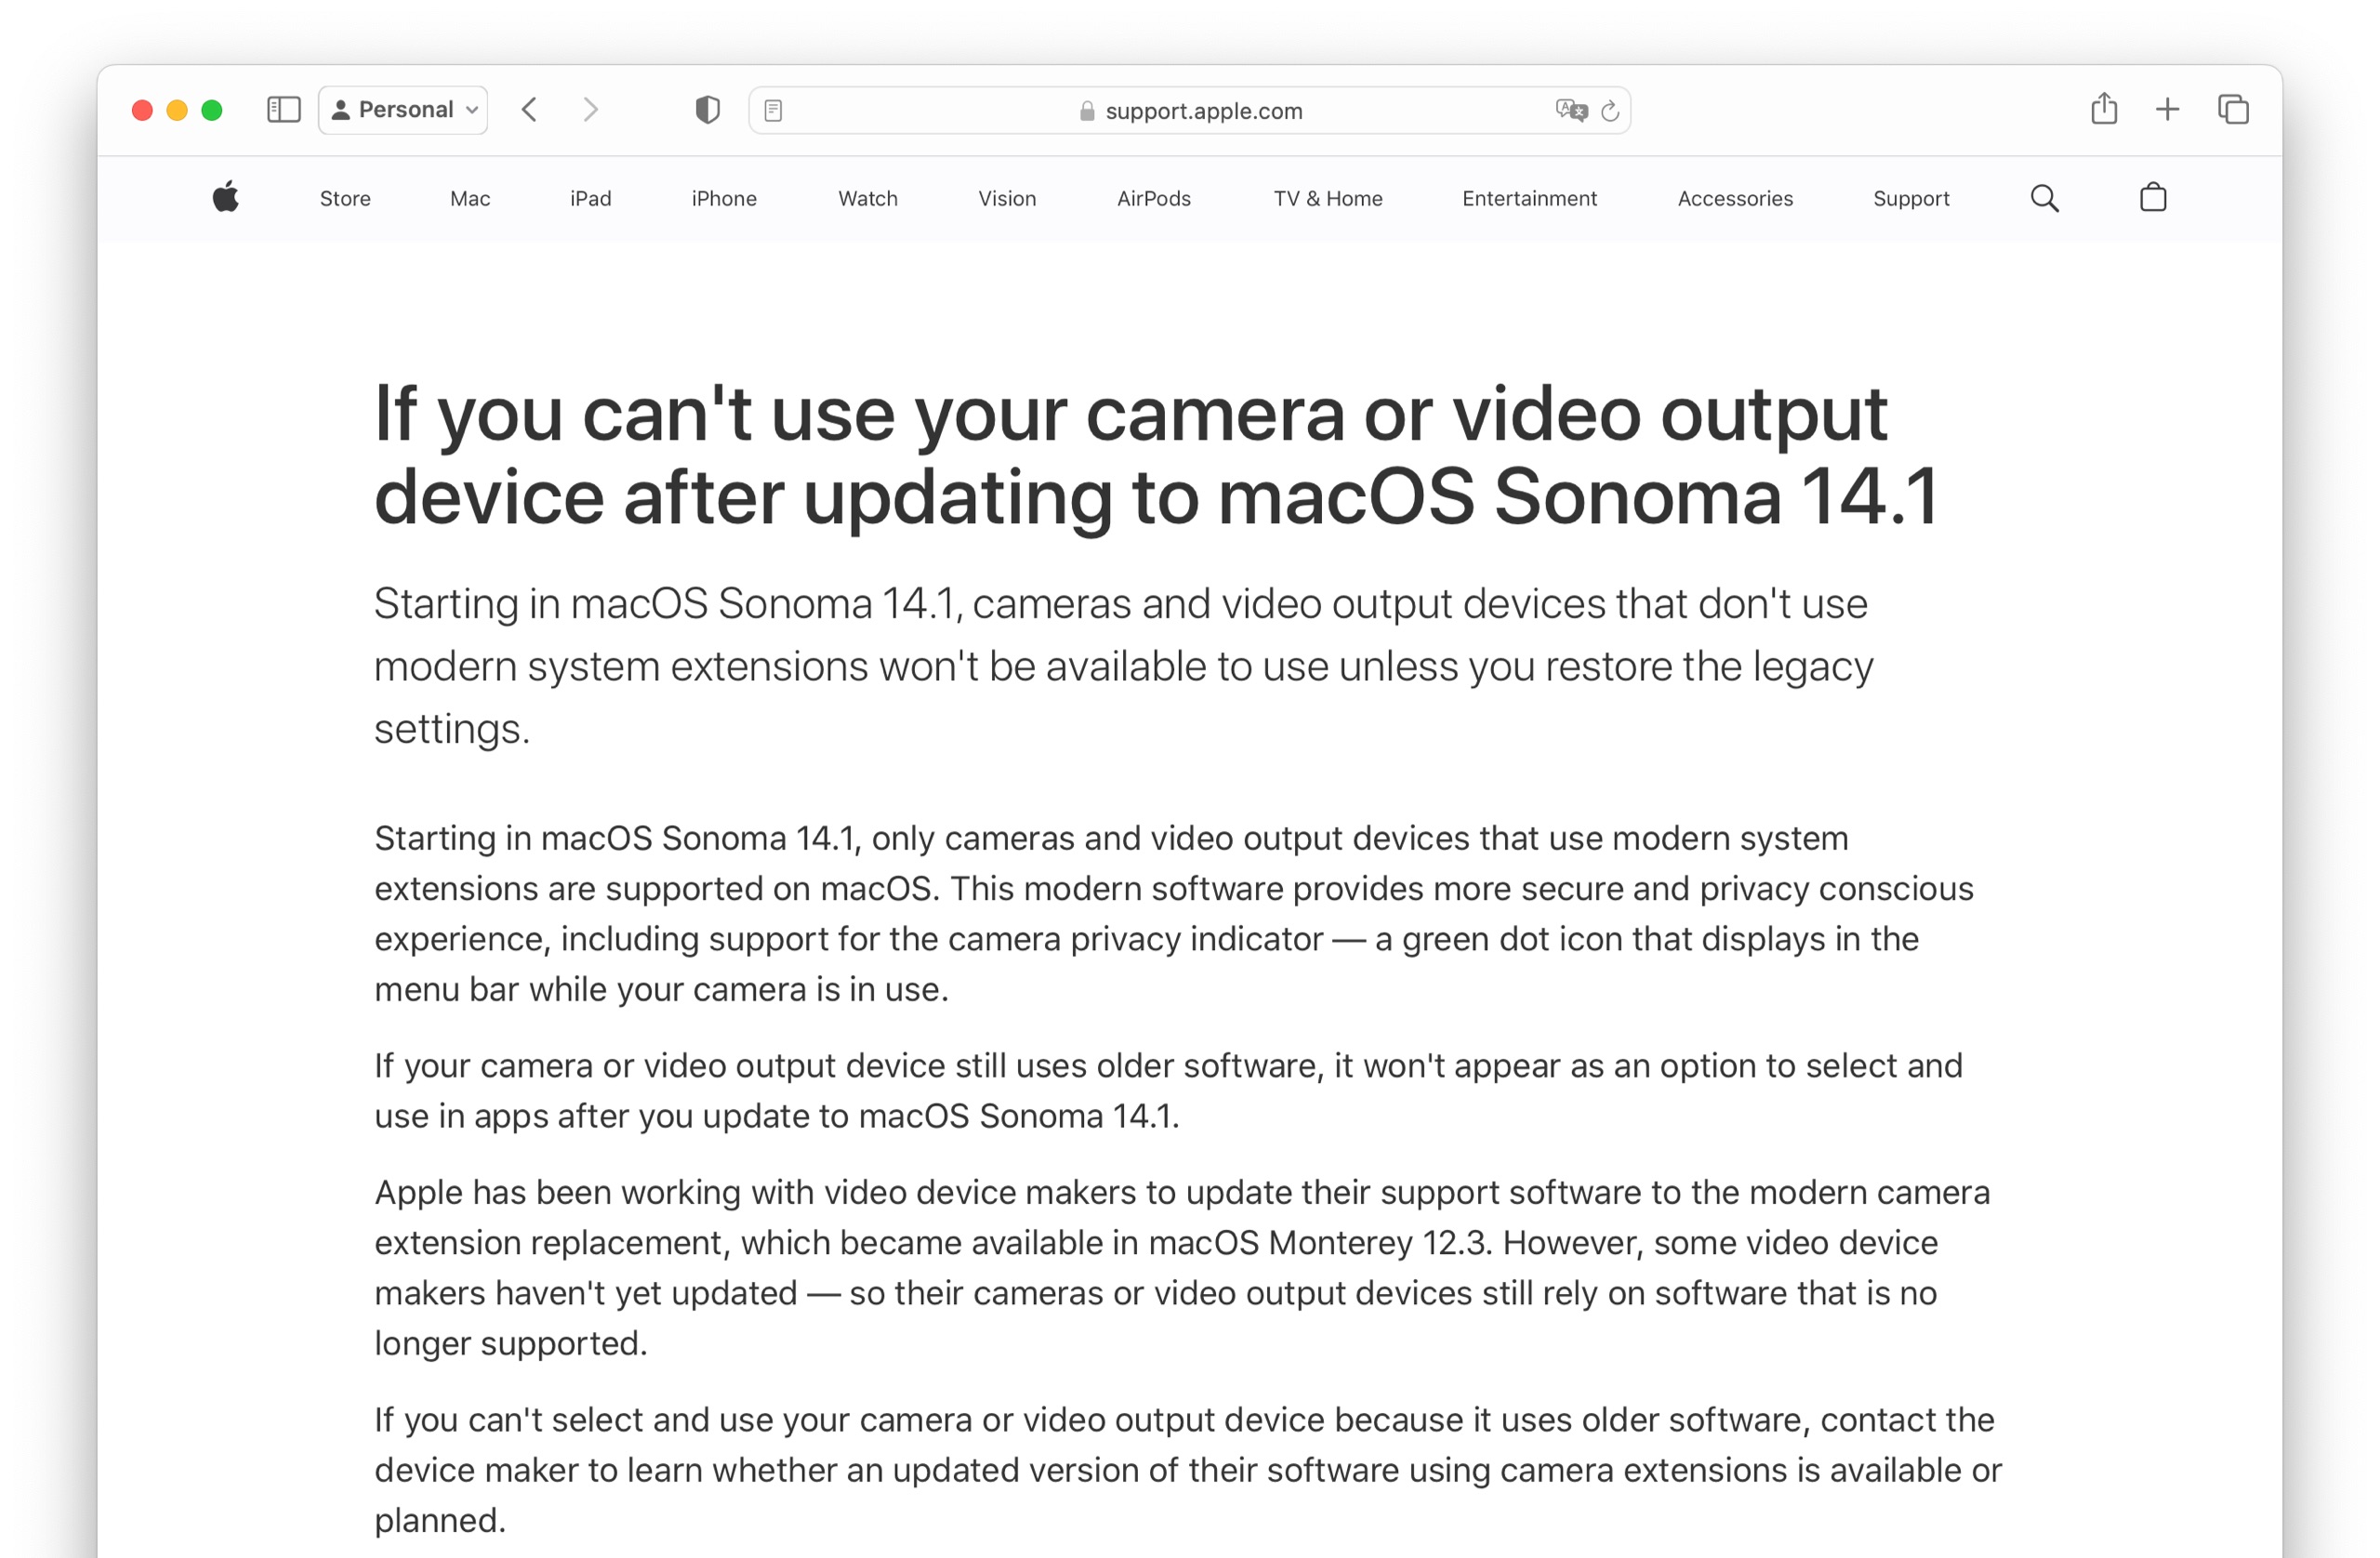 If you can't use your camera or video output device after updating to macOS Sonoma 14.1